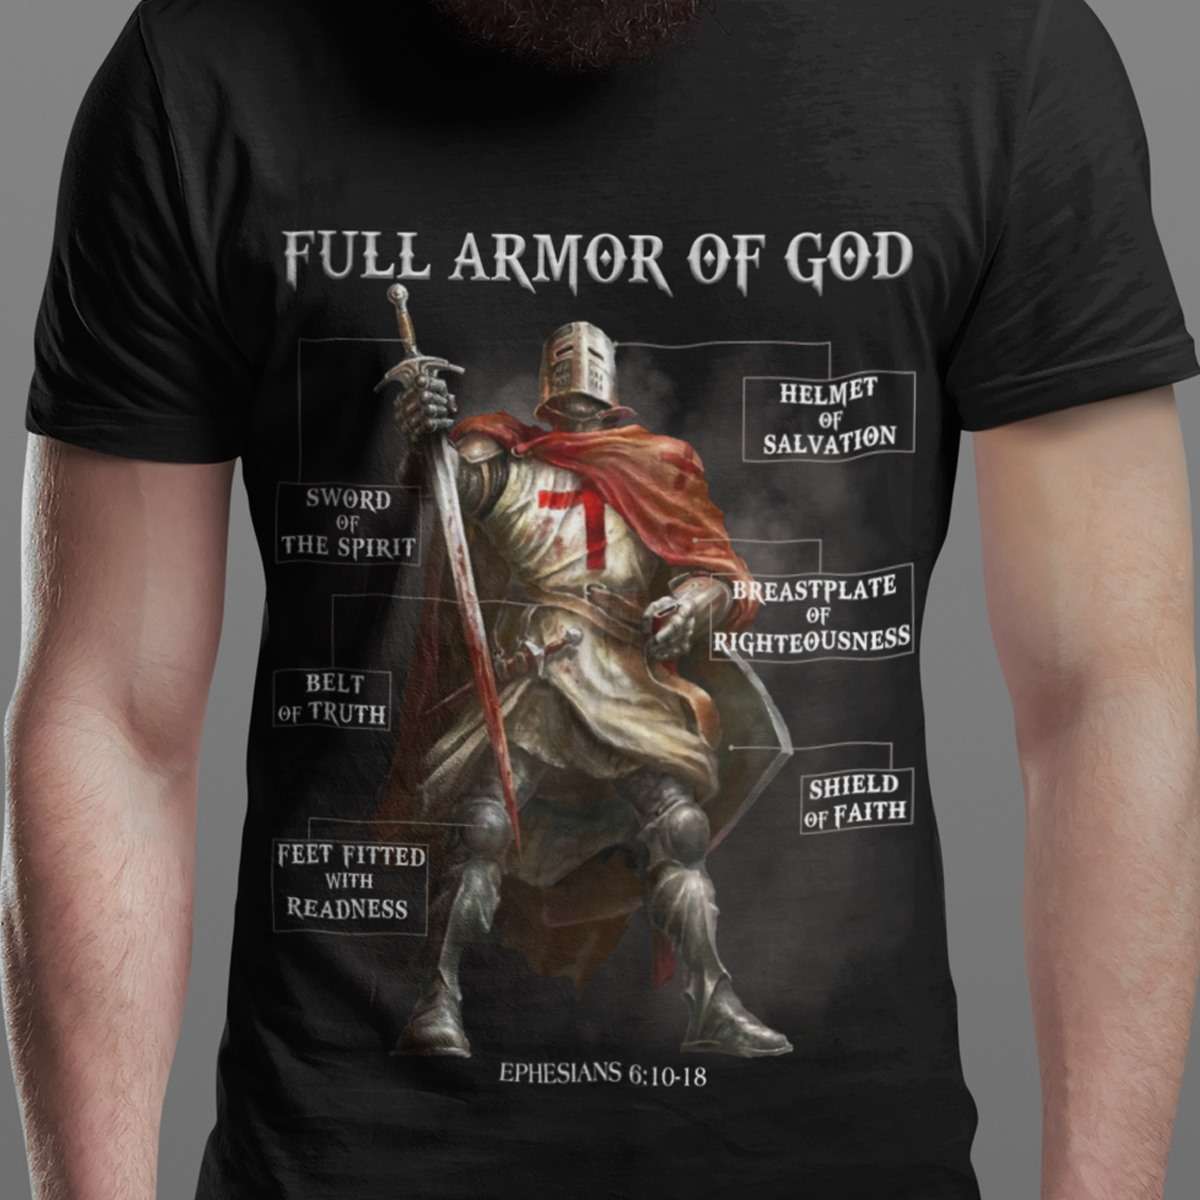 Full armor of god sword of the spirit belt of truth feet fitted with readness